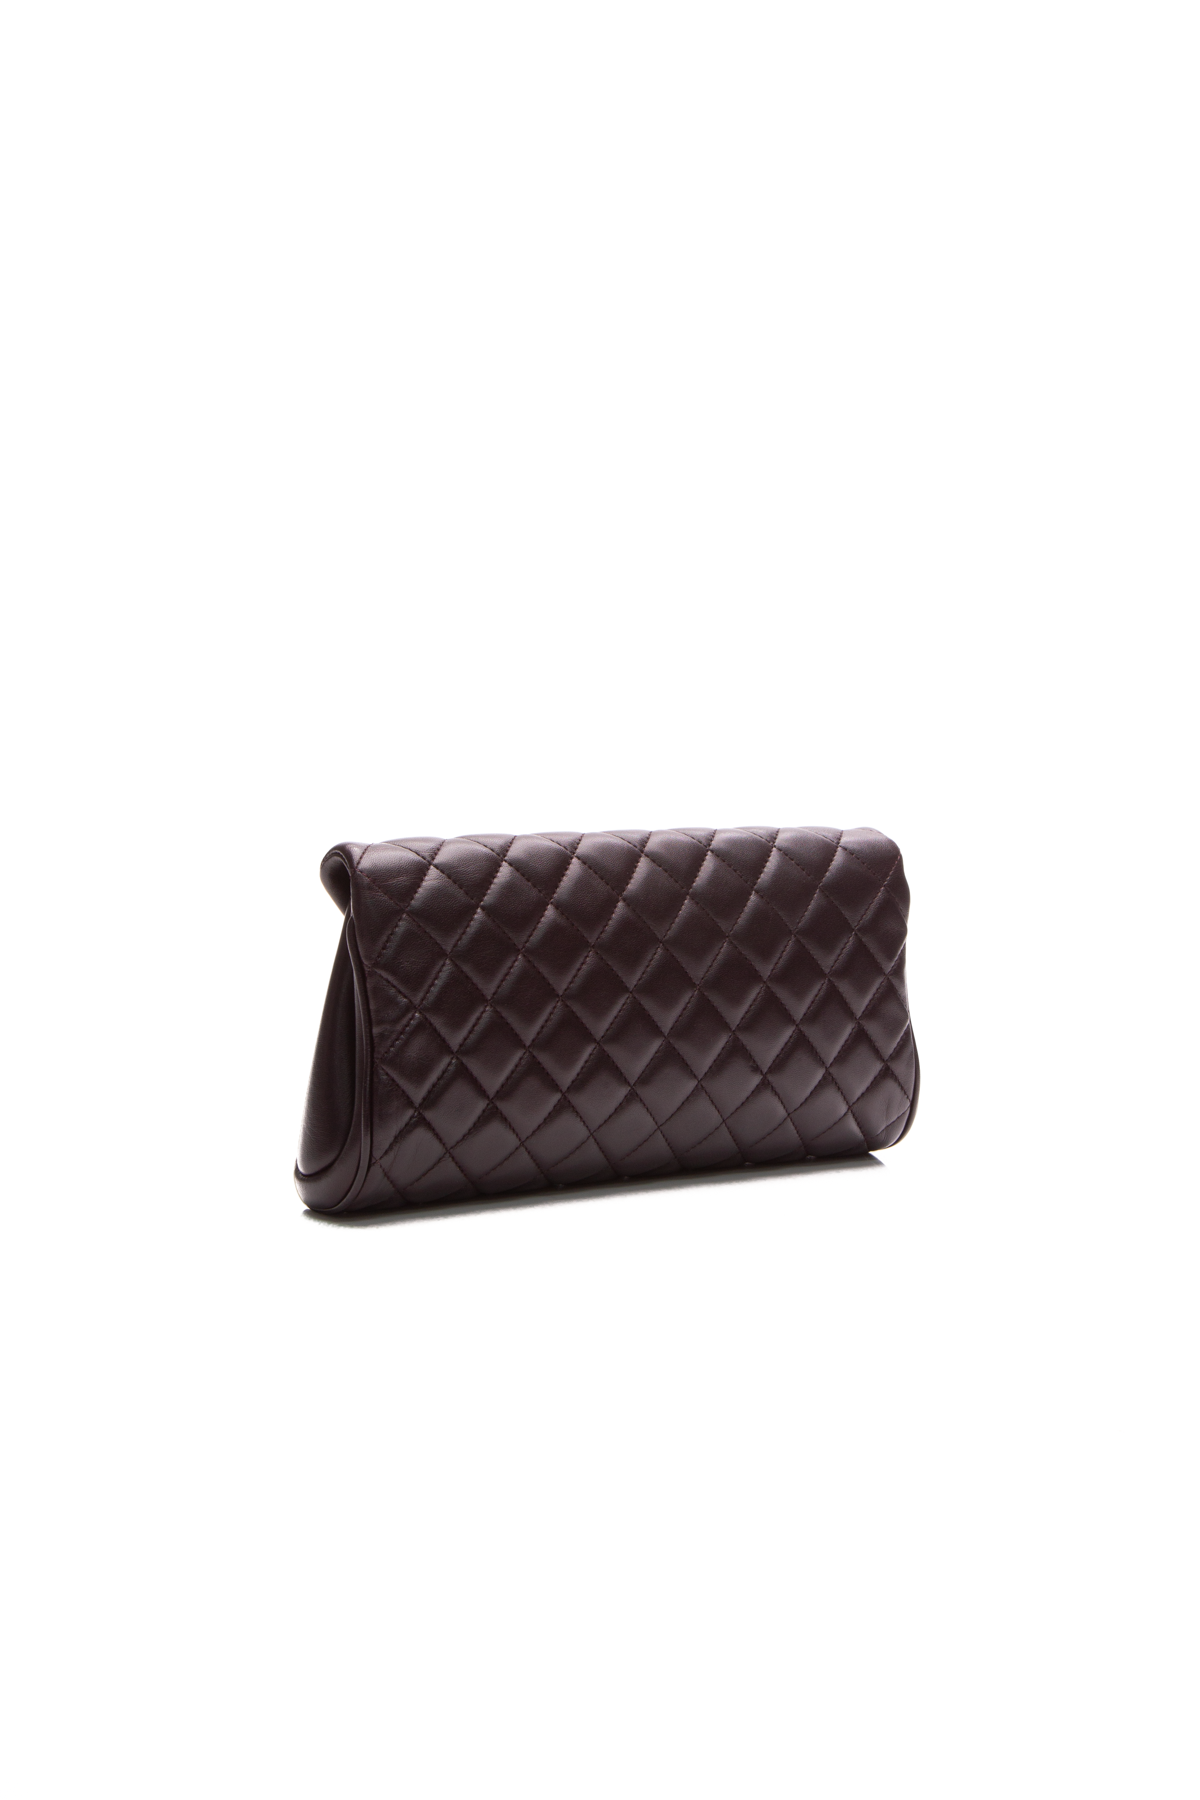 Chanel Fold Up Again Clutch - Couture USA